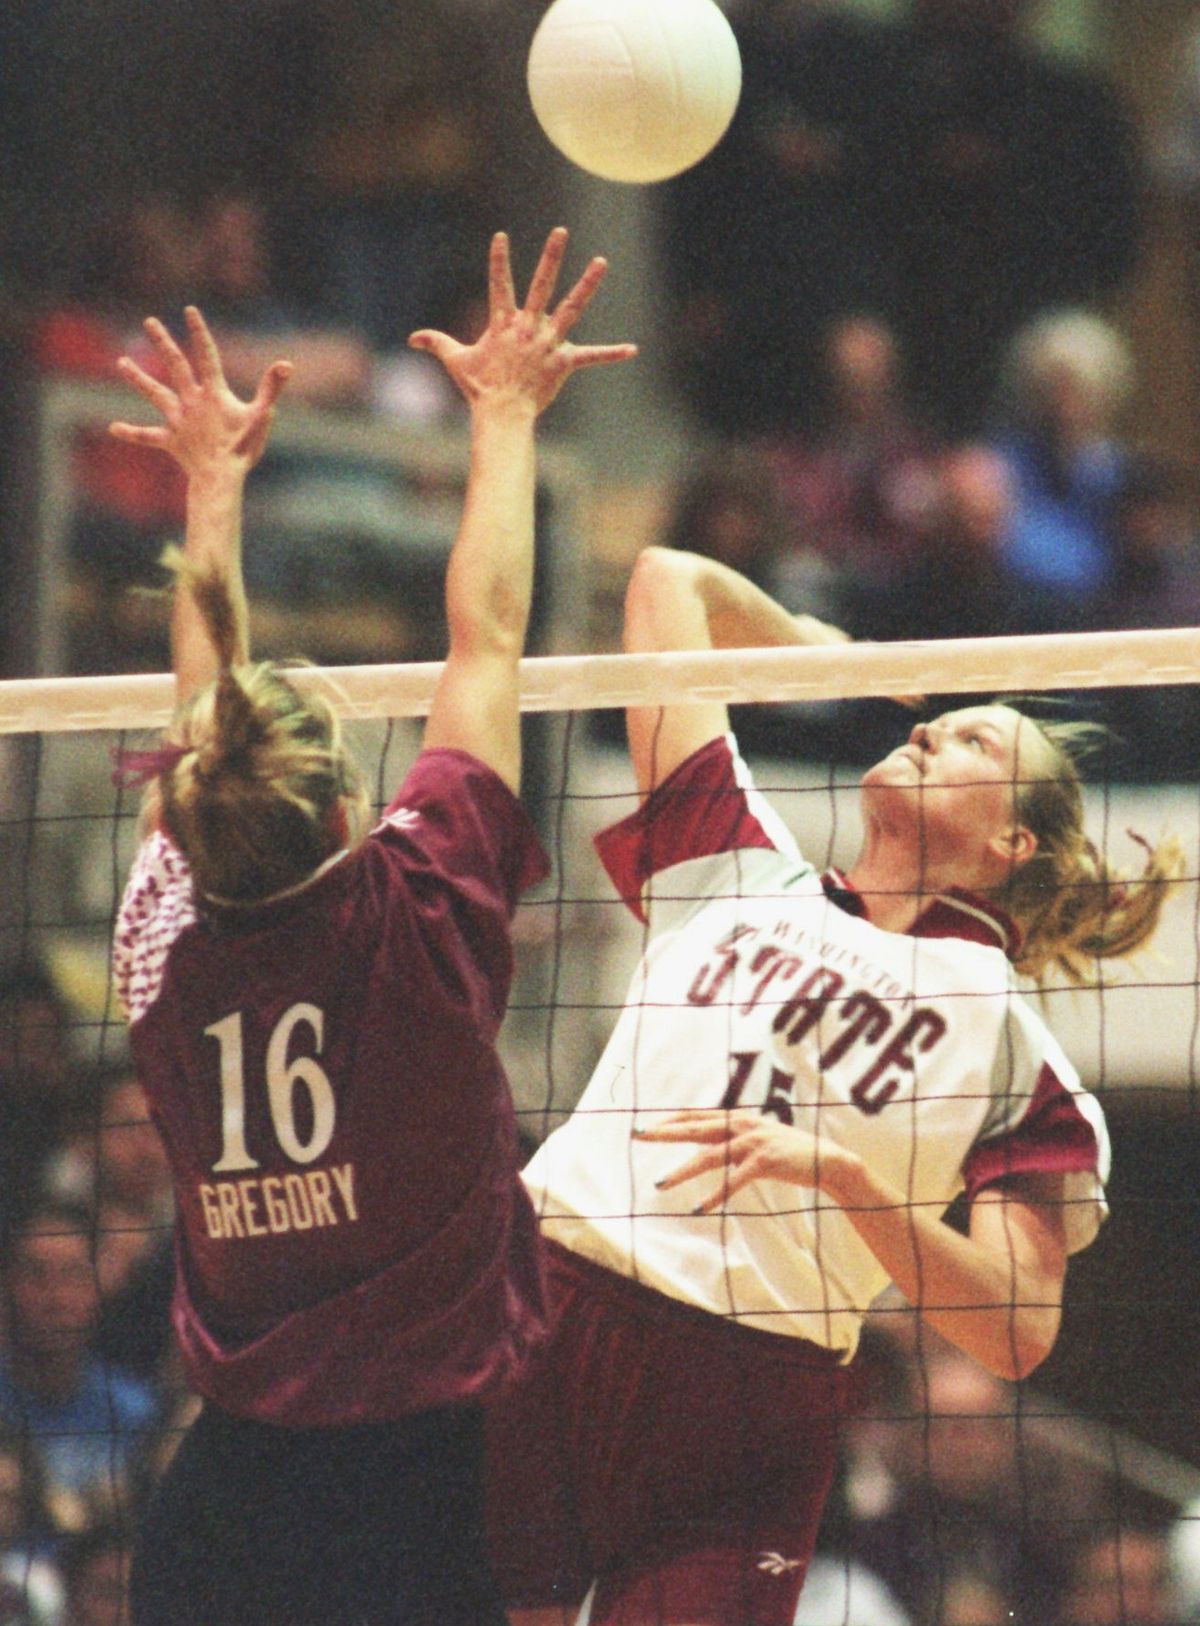 Then: WSU volleyball All-American Sarah Silvernail goes on the attack against Stanford in 1996. (File)